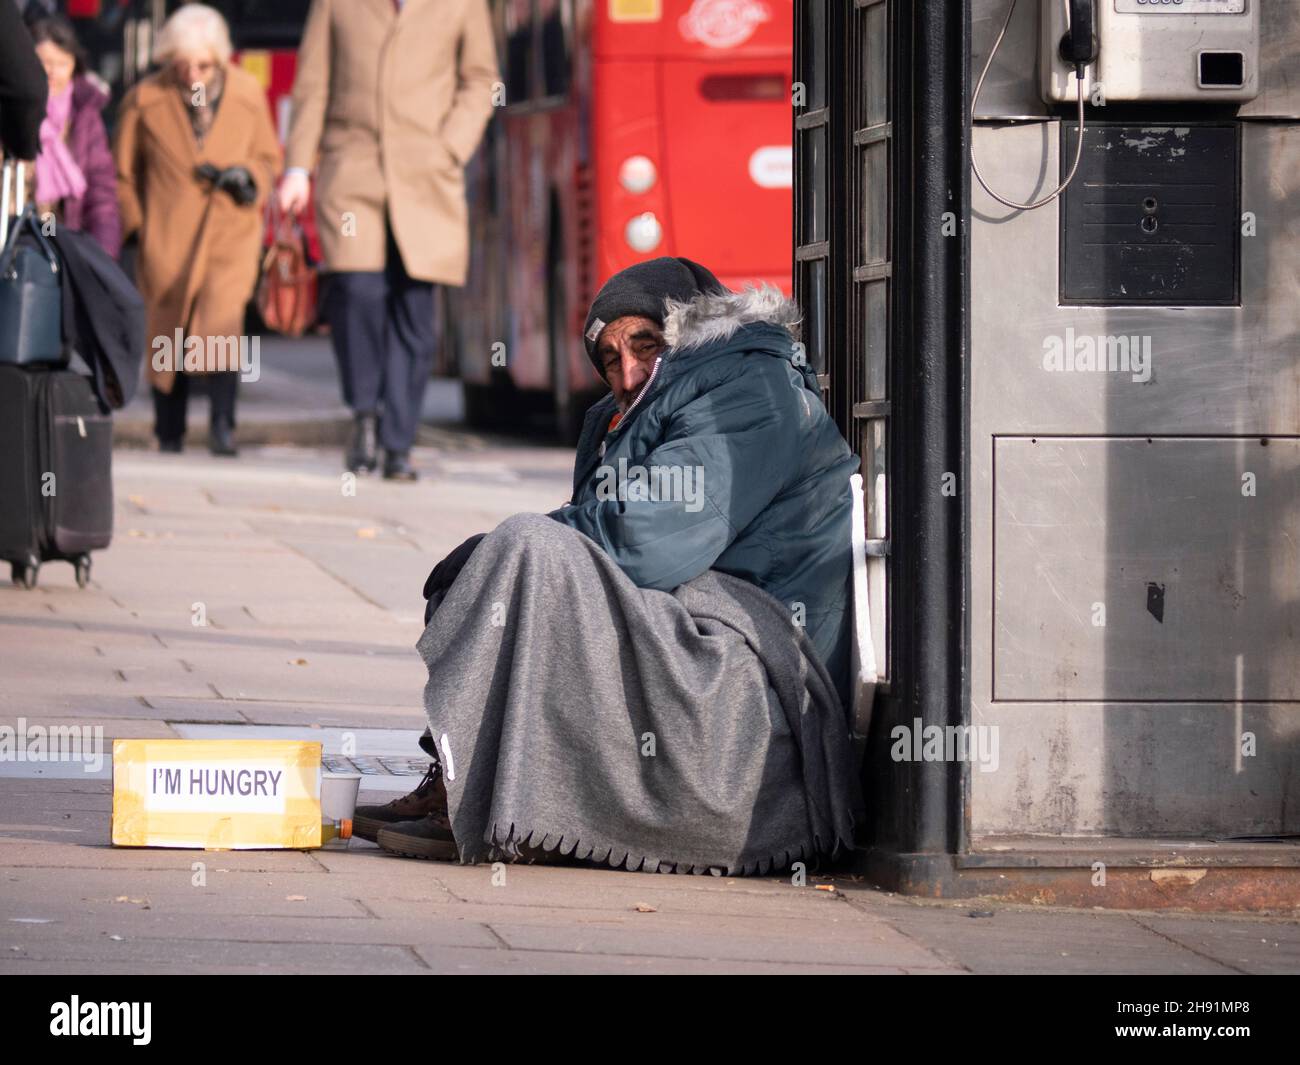 Rich poor divide inequality, male beggar with I'm Hungry sign, begs in Mayfair London as affluent well dressed people walk by Stock Photo